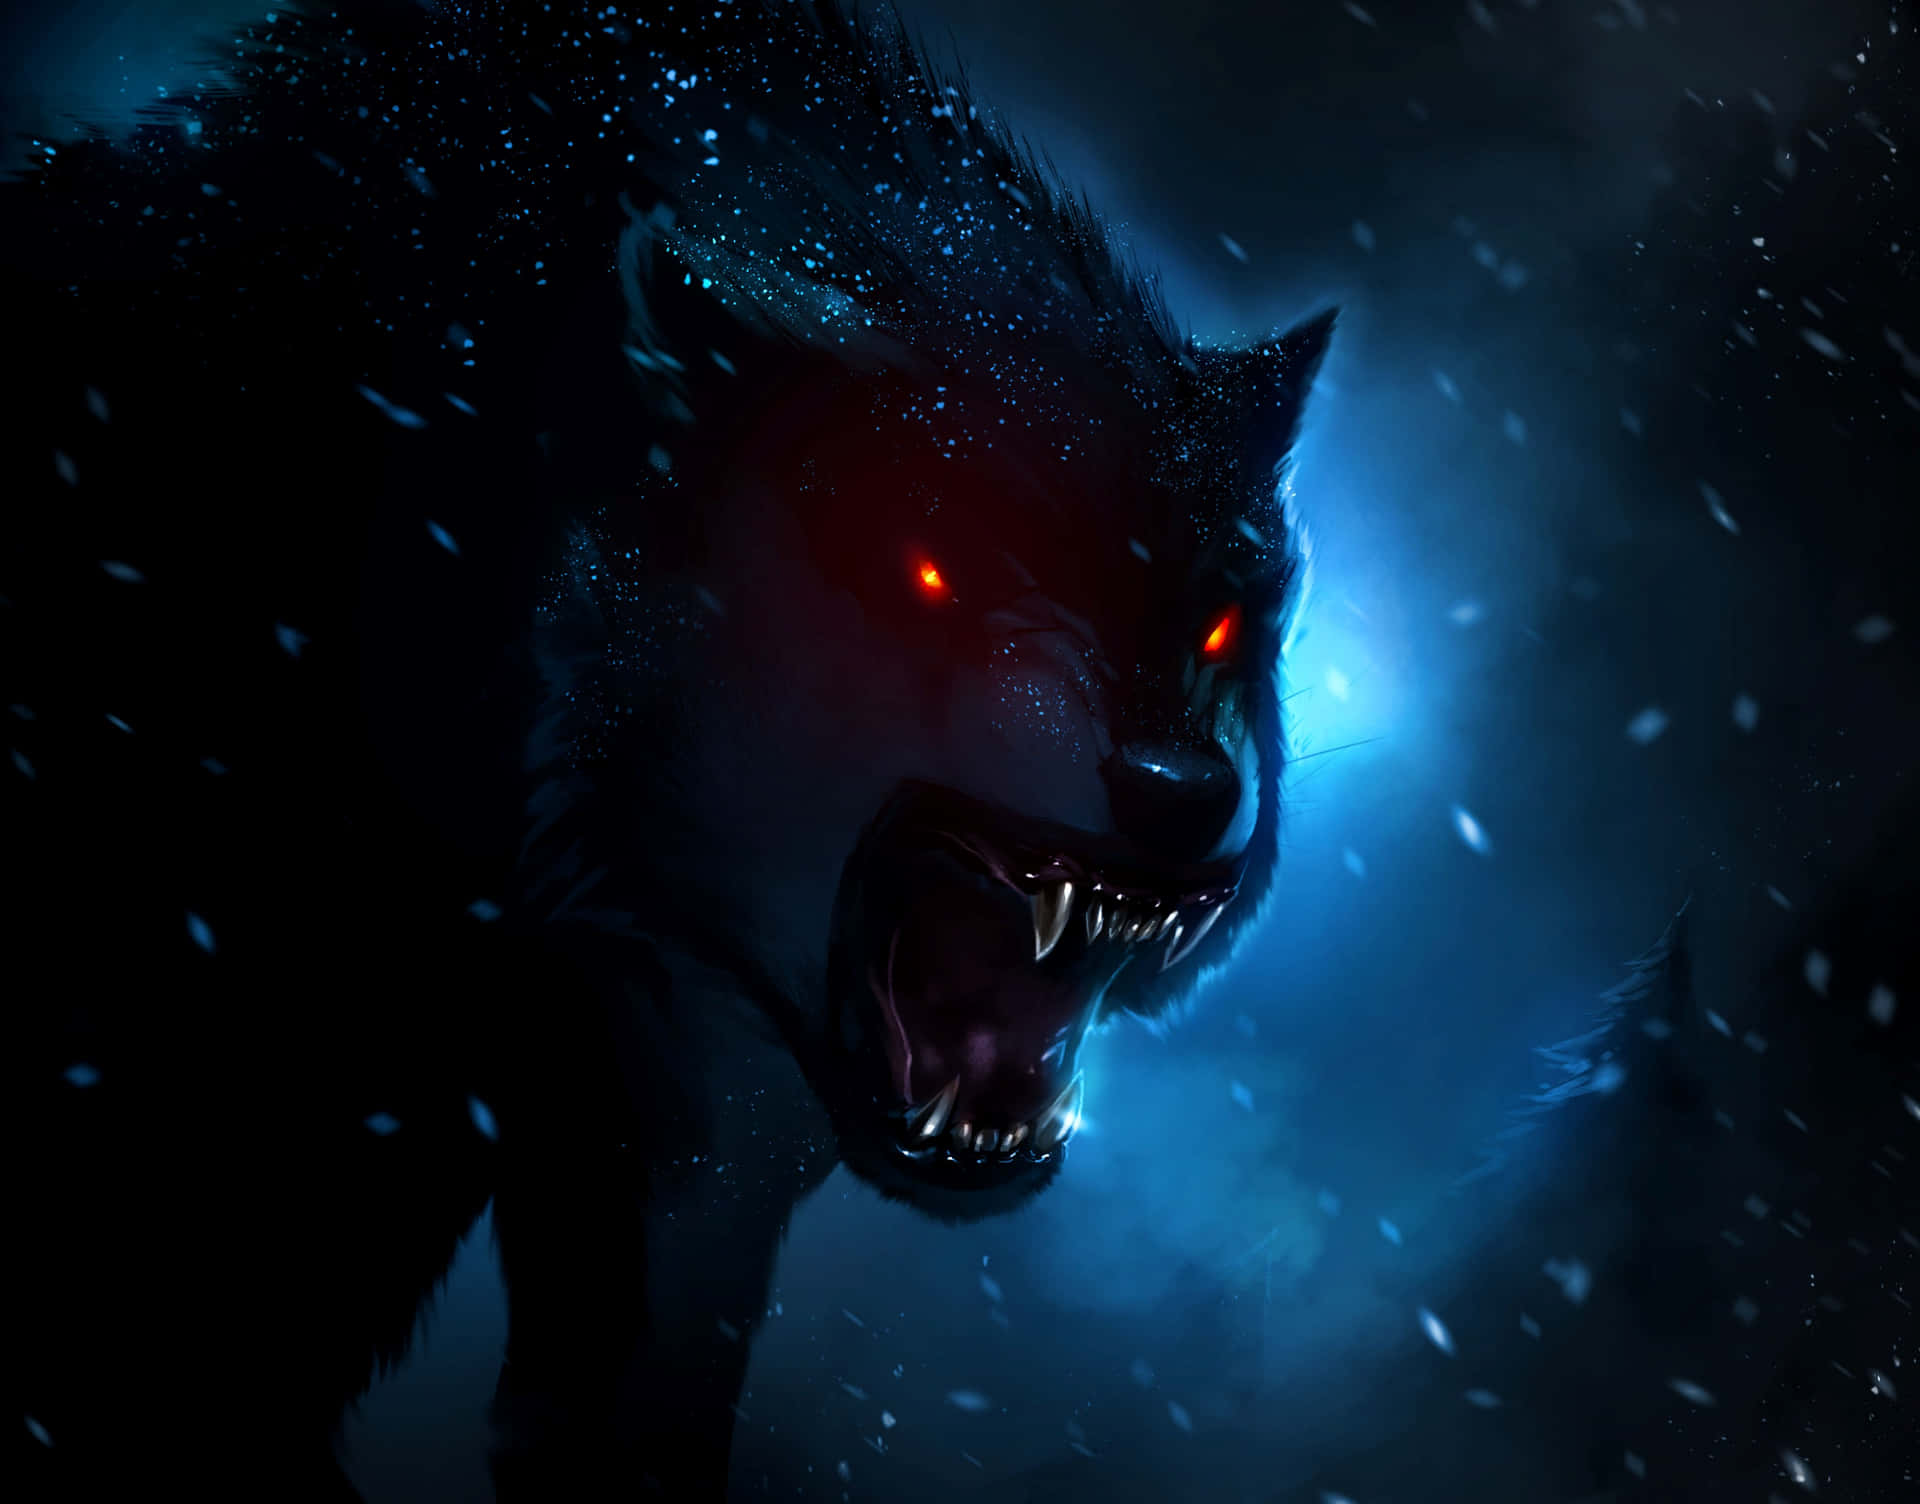 An Insightful Look into the Dark Mind of a Black Wolf